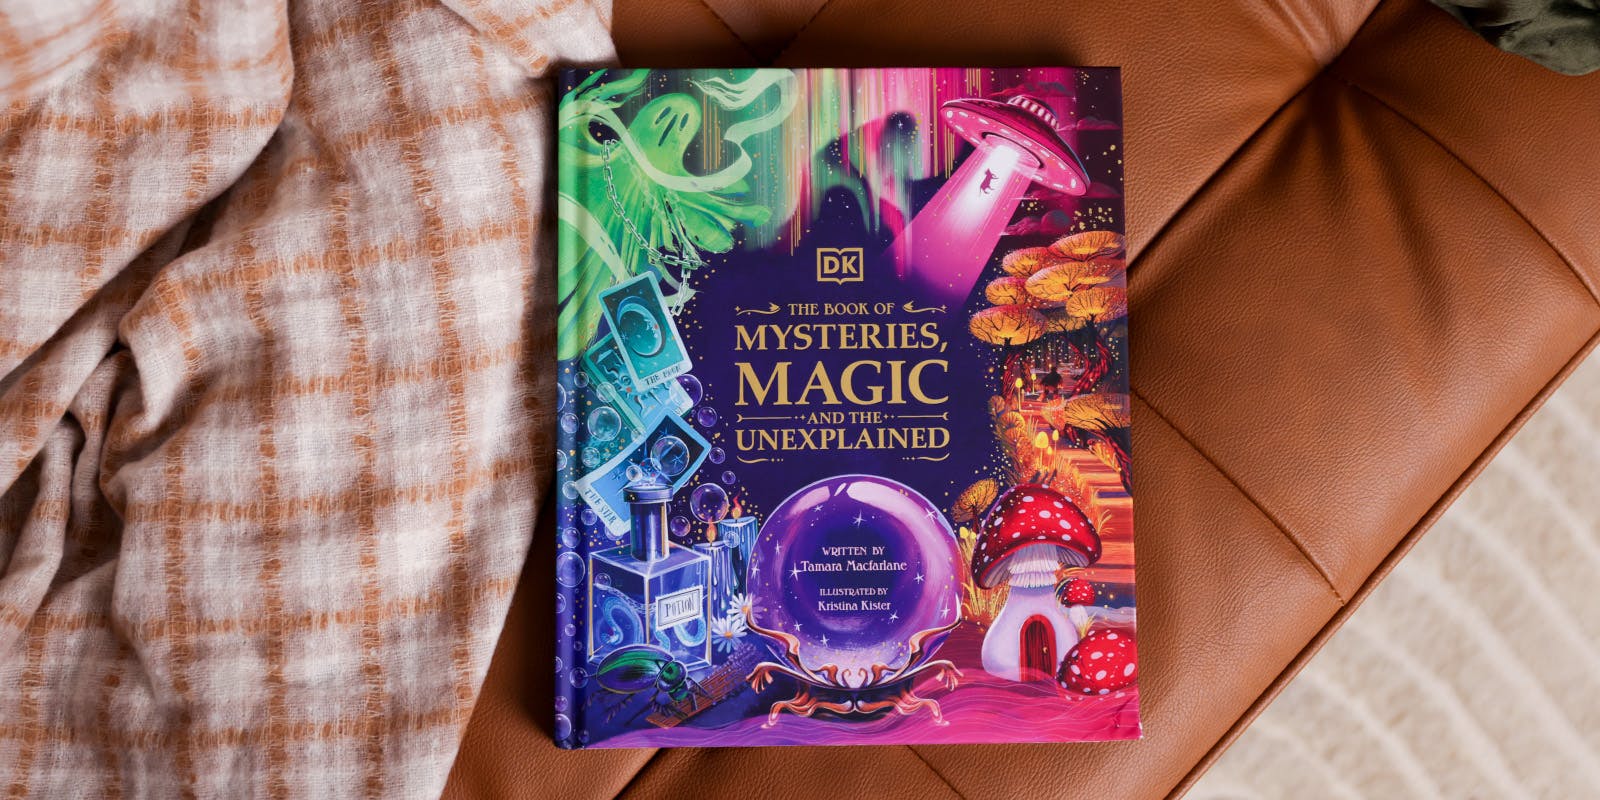 Look inside this book about all things magical and unexplained